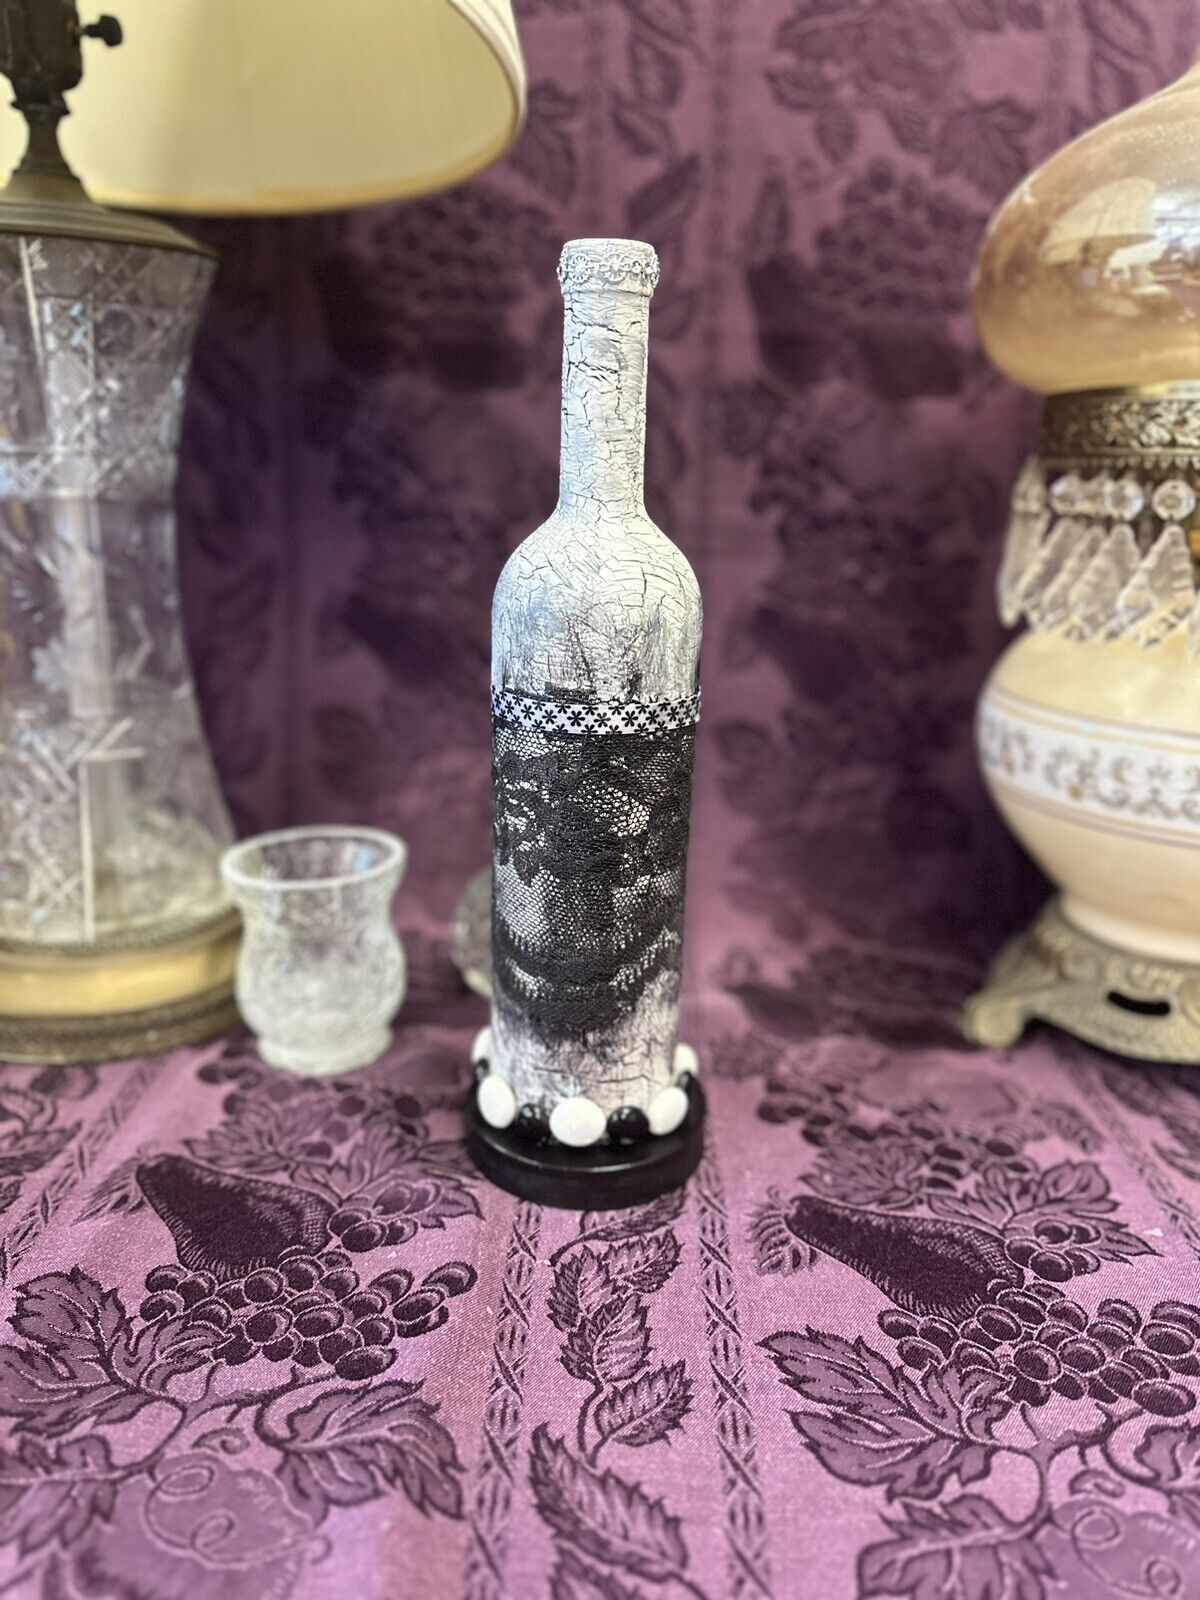 Decorative Wine Bottle Stained Glass Upcycled Hand Painted Crown Black & White Decorative Bottles Stylin’ Spirit   